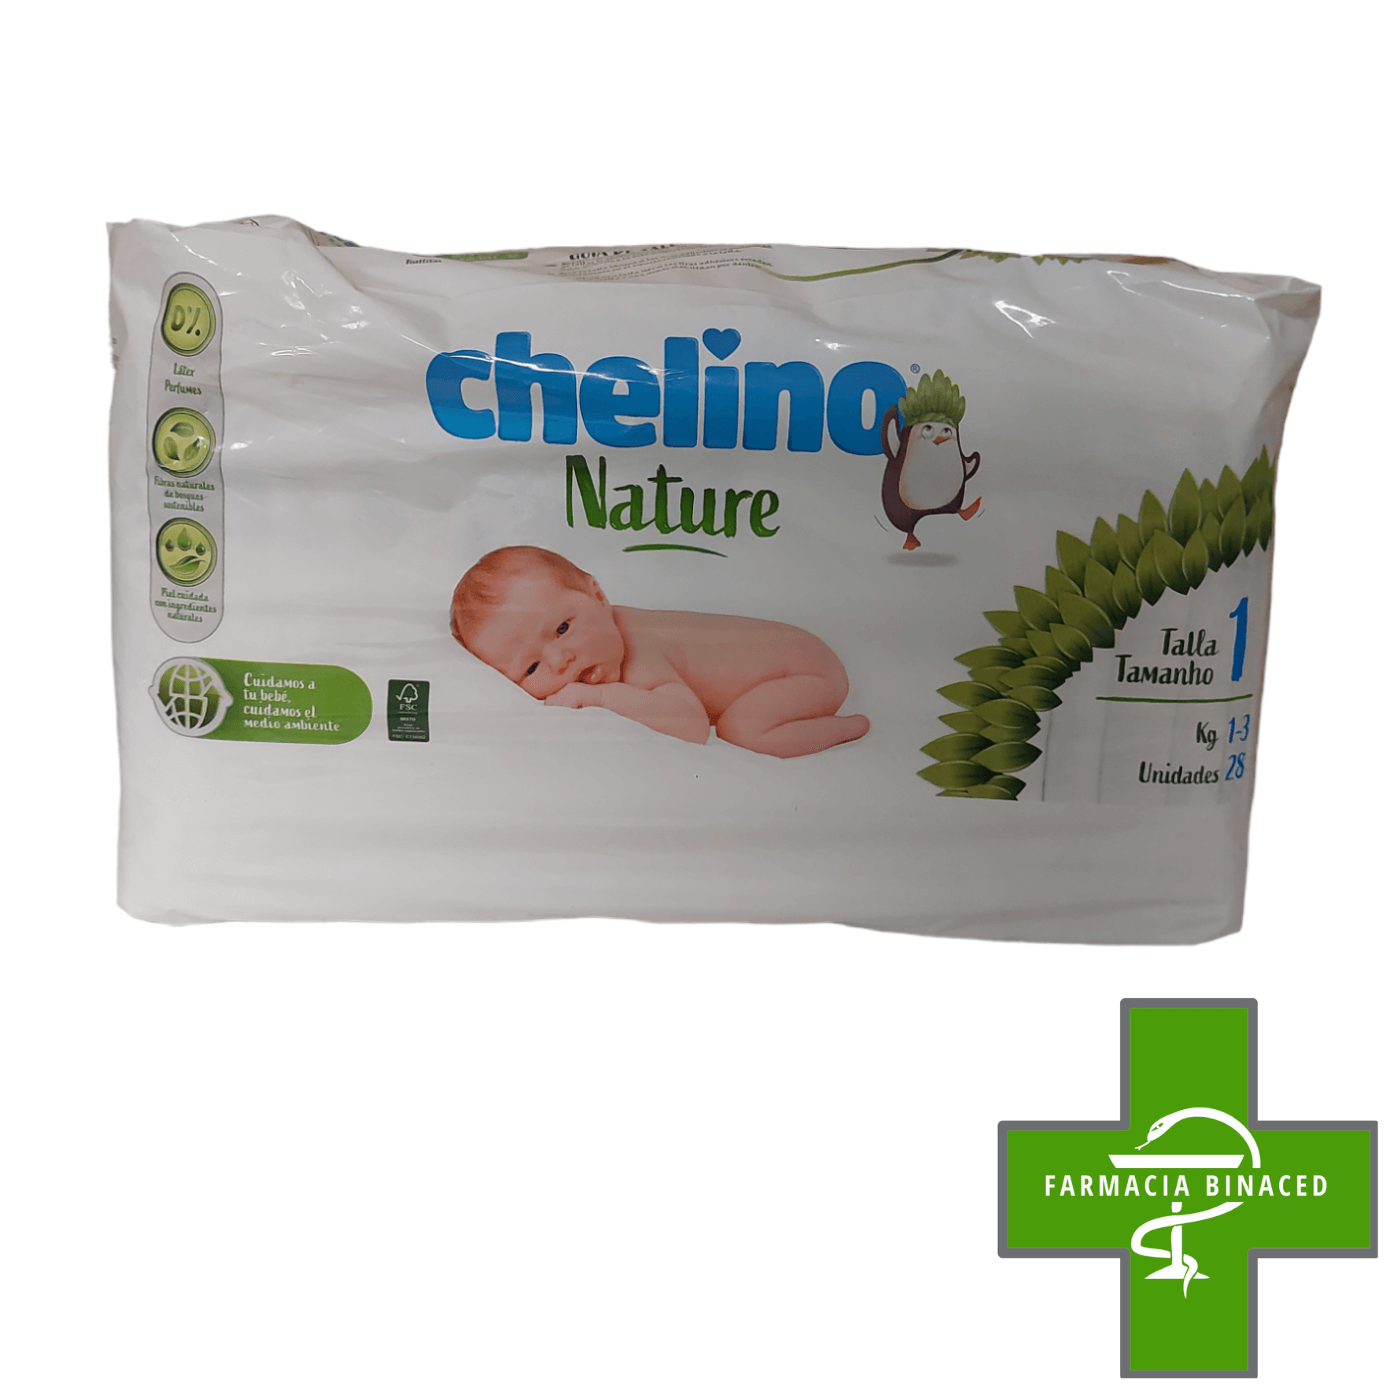 CHELINO NATURE 1 PAÑAL 1-3KG 28UDS